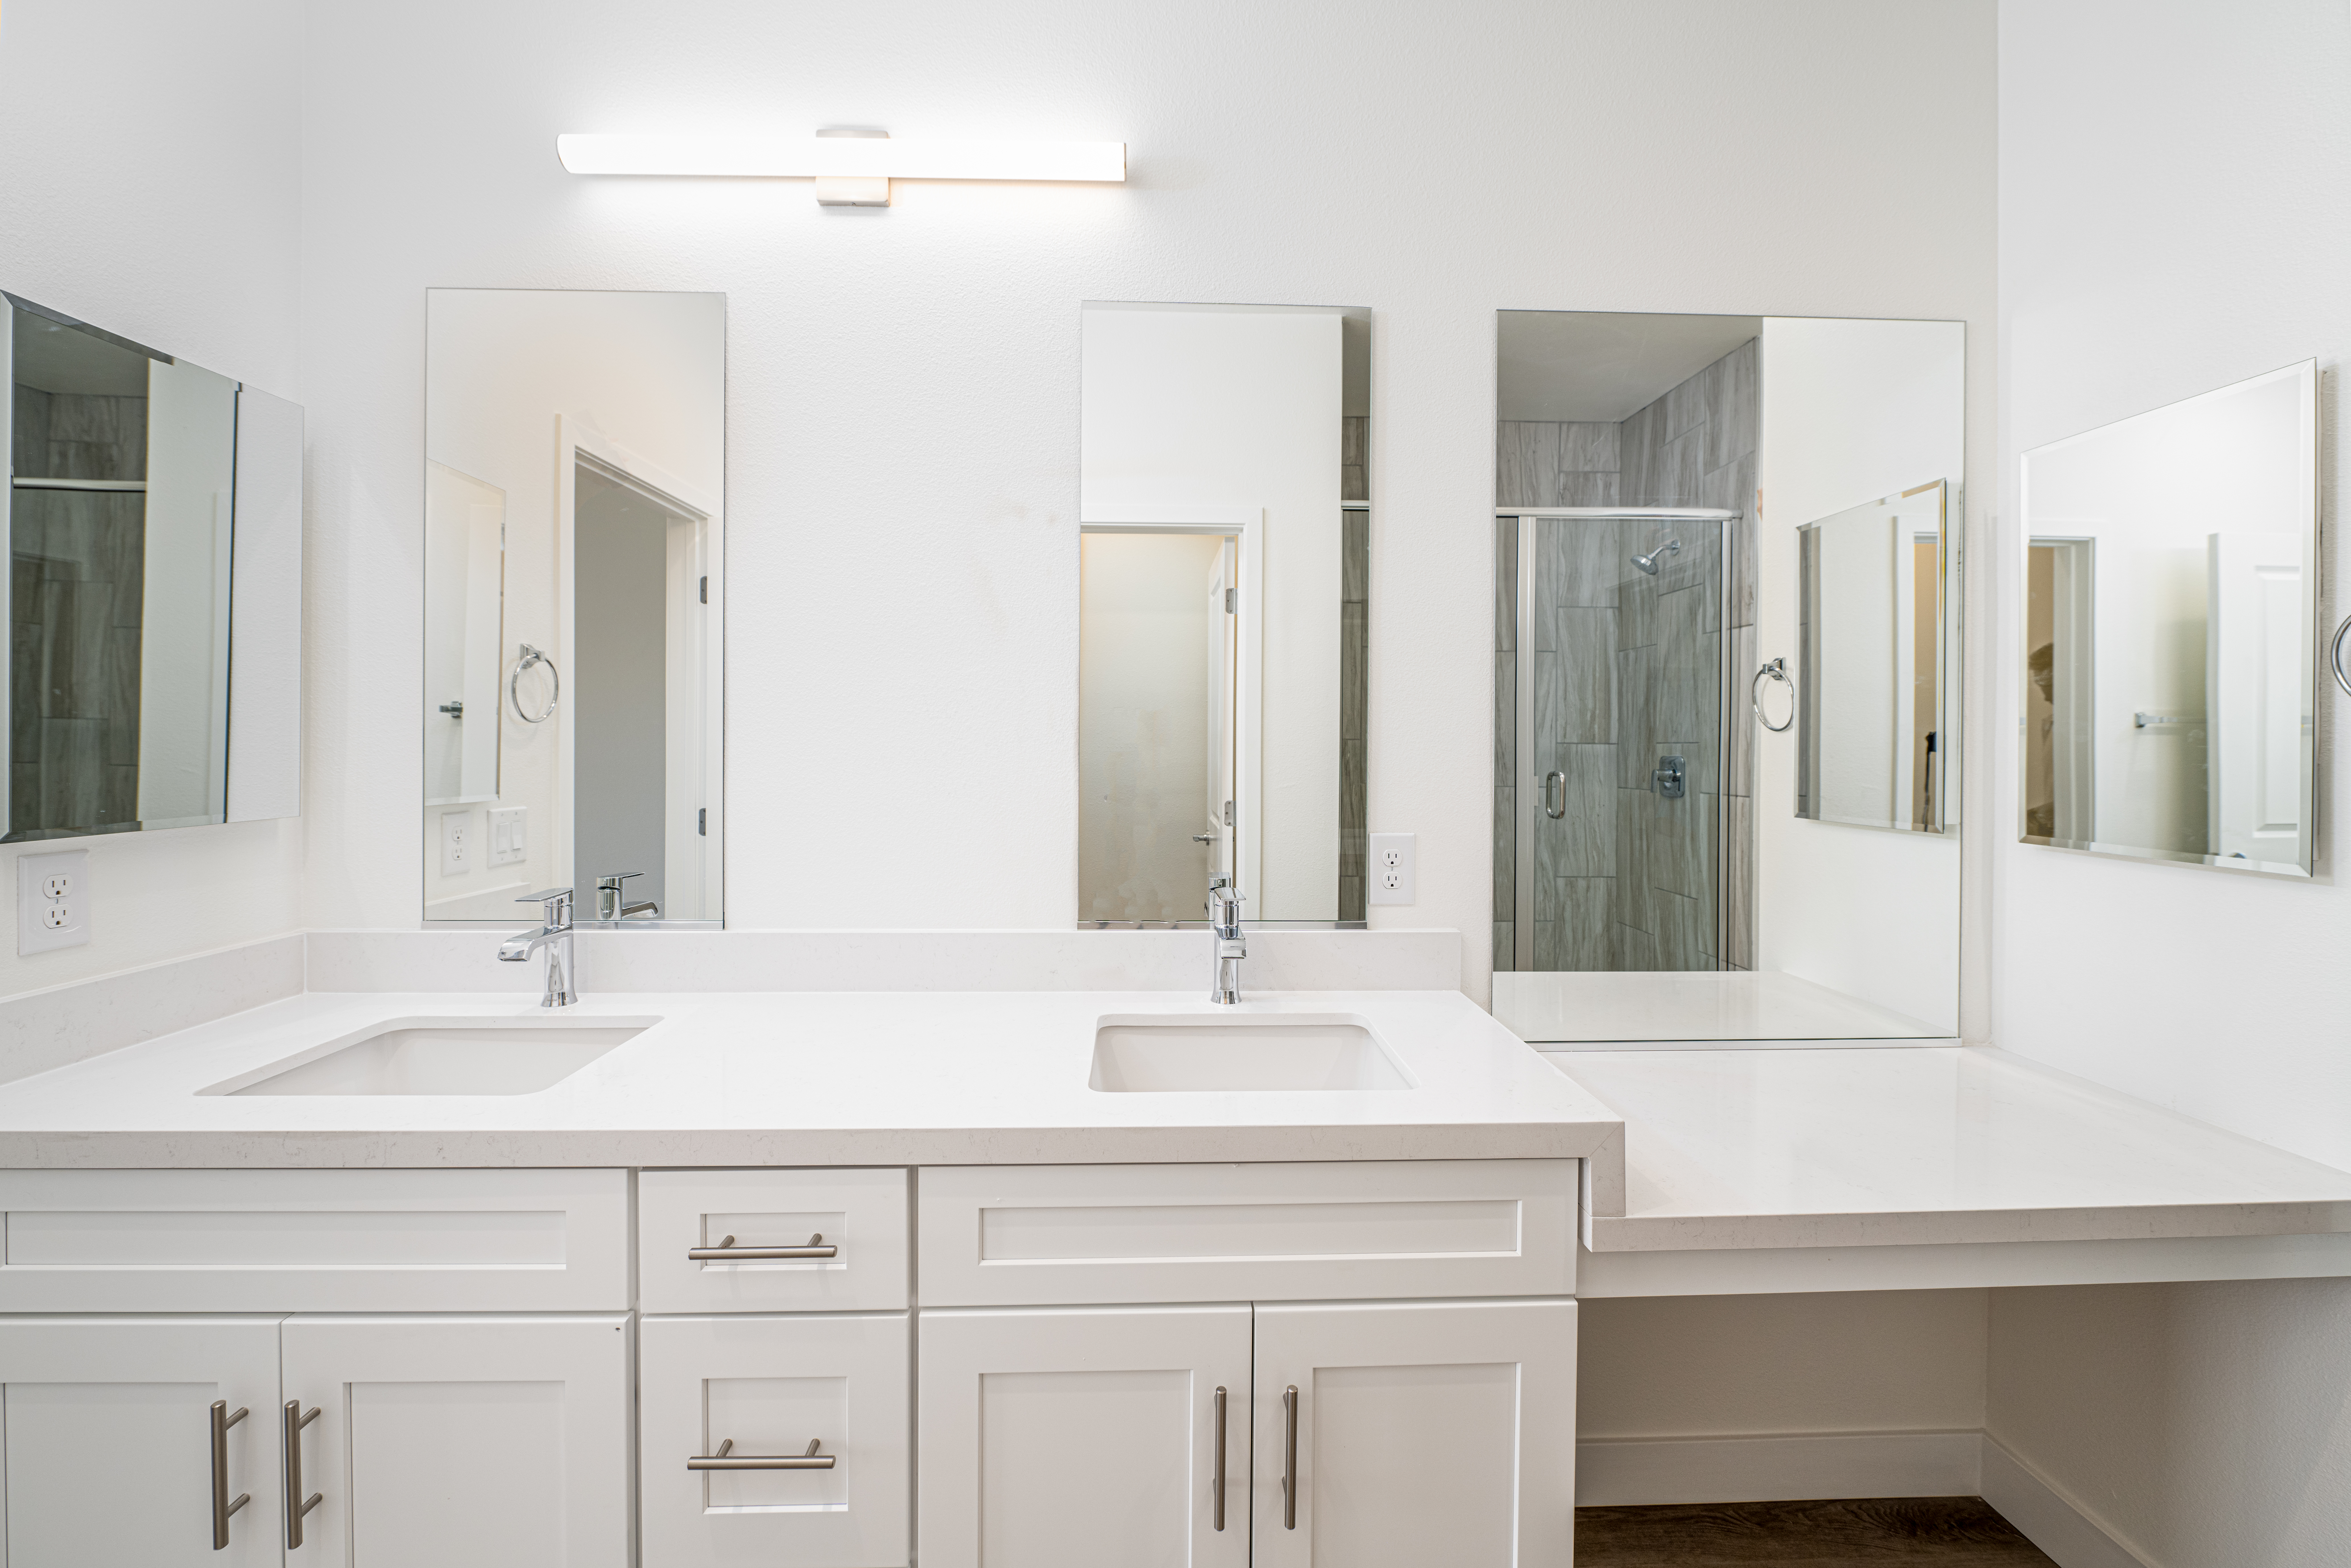 Primary Bathroom of Unit B at Thrive by Edward Homes